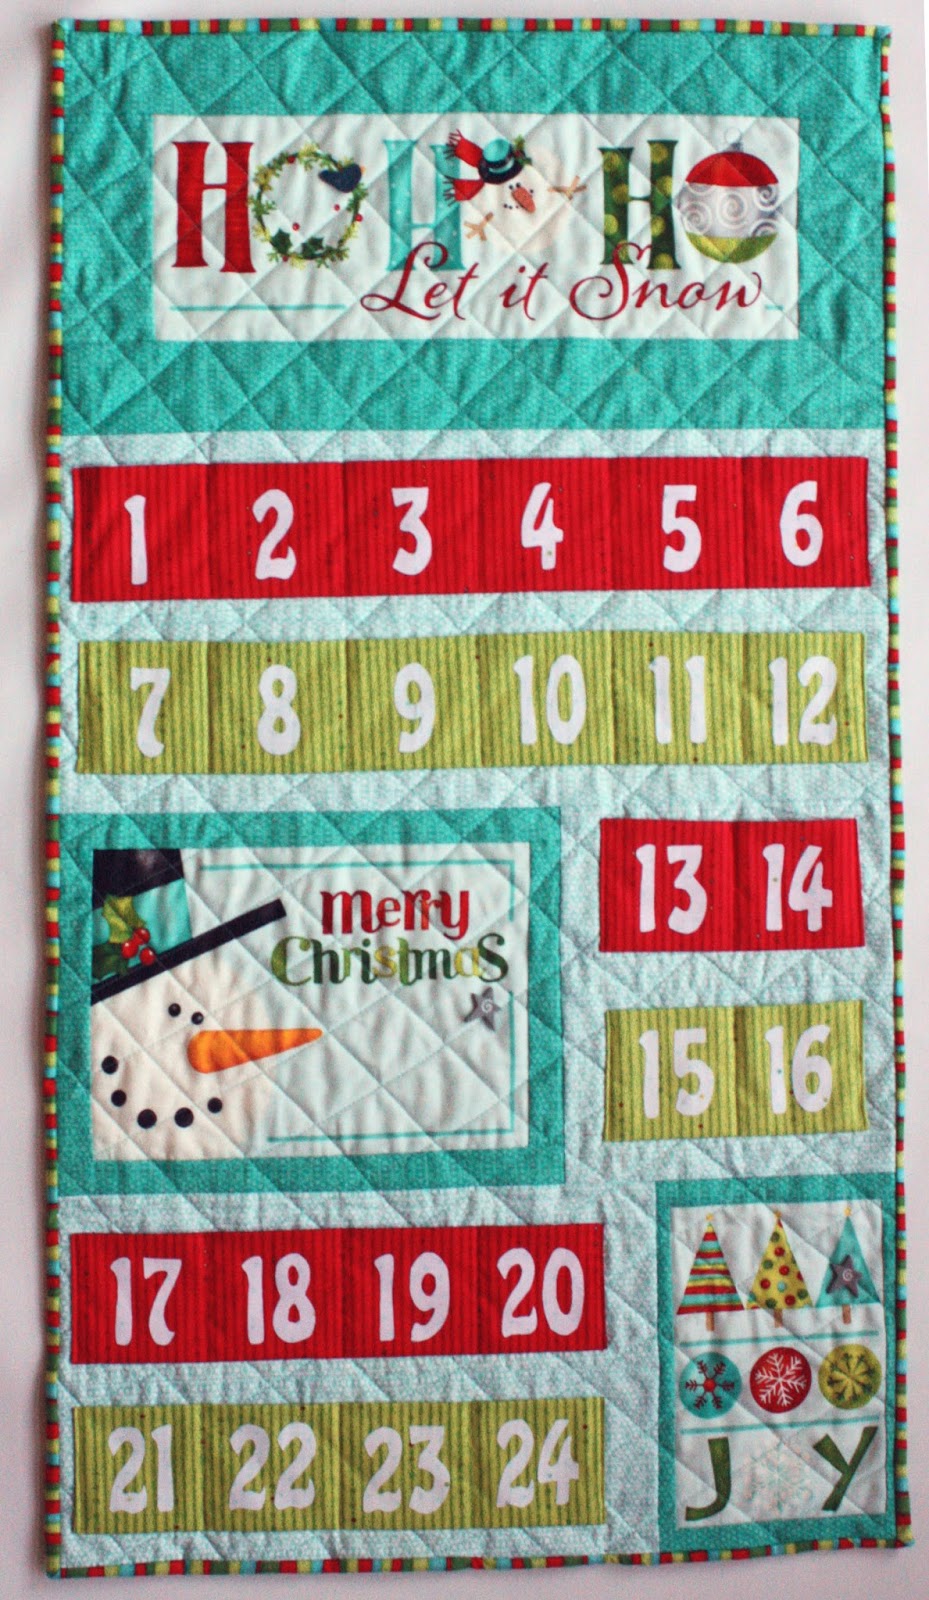 Funny Frogs 12 days of Christmas Fabric Panel to sew //